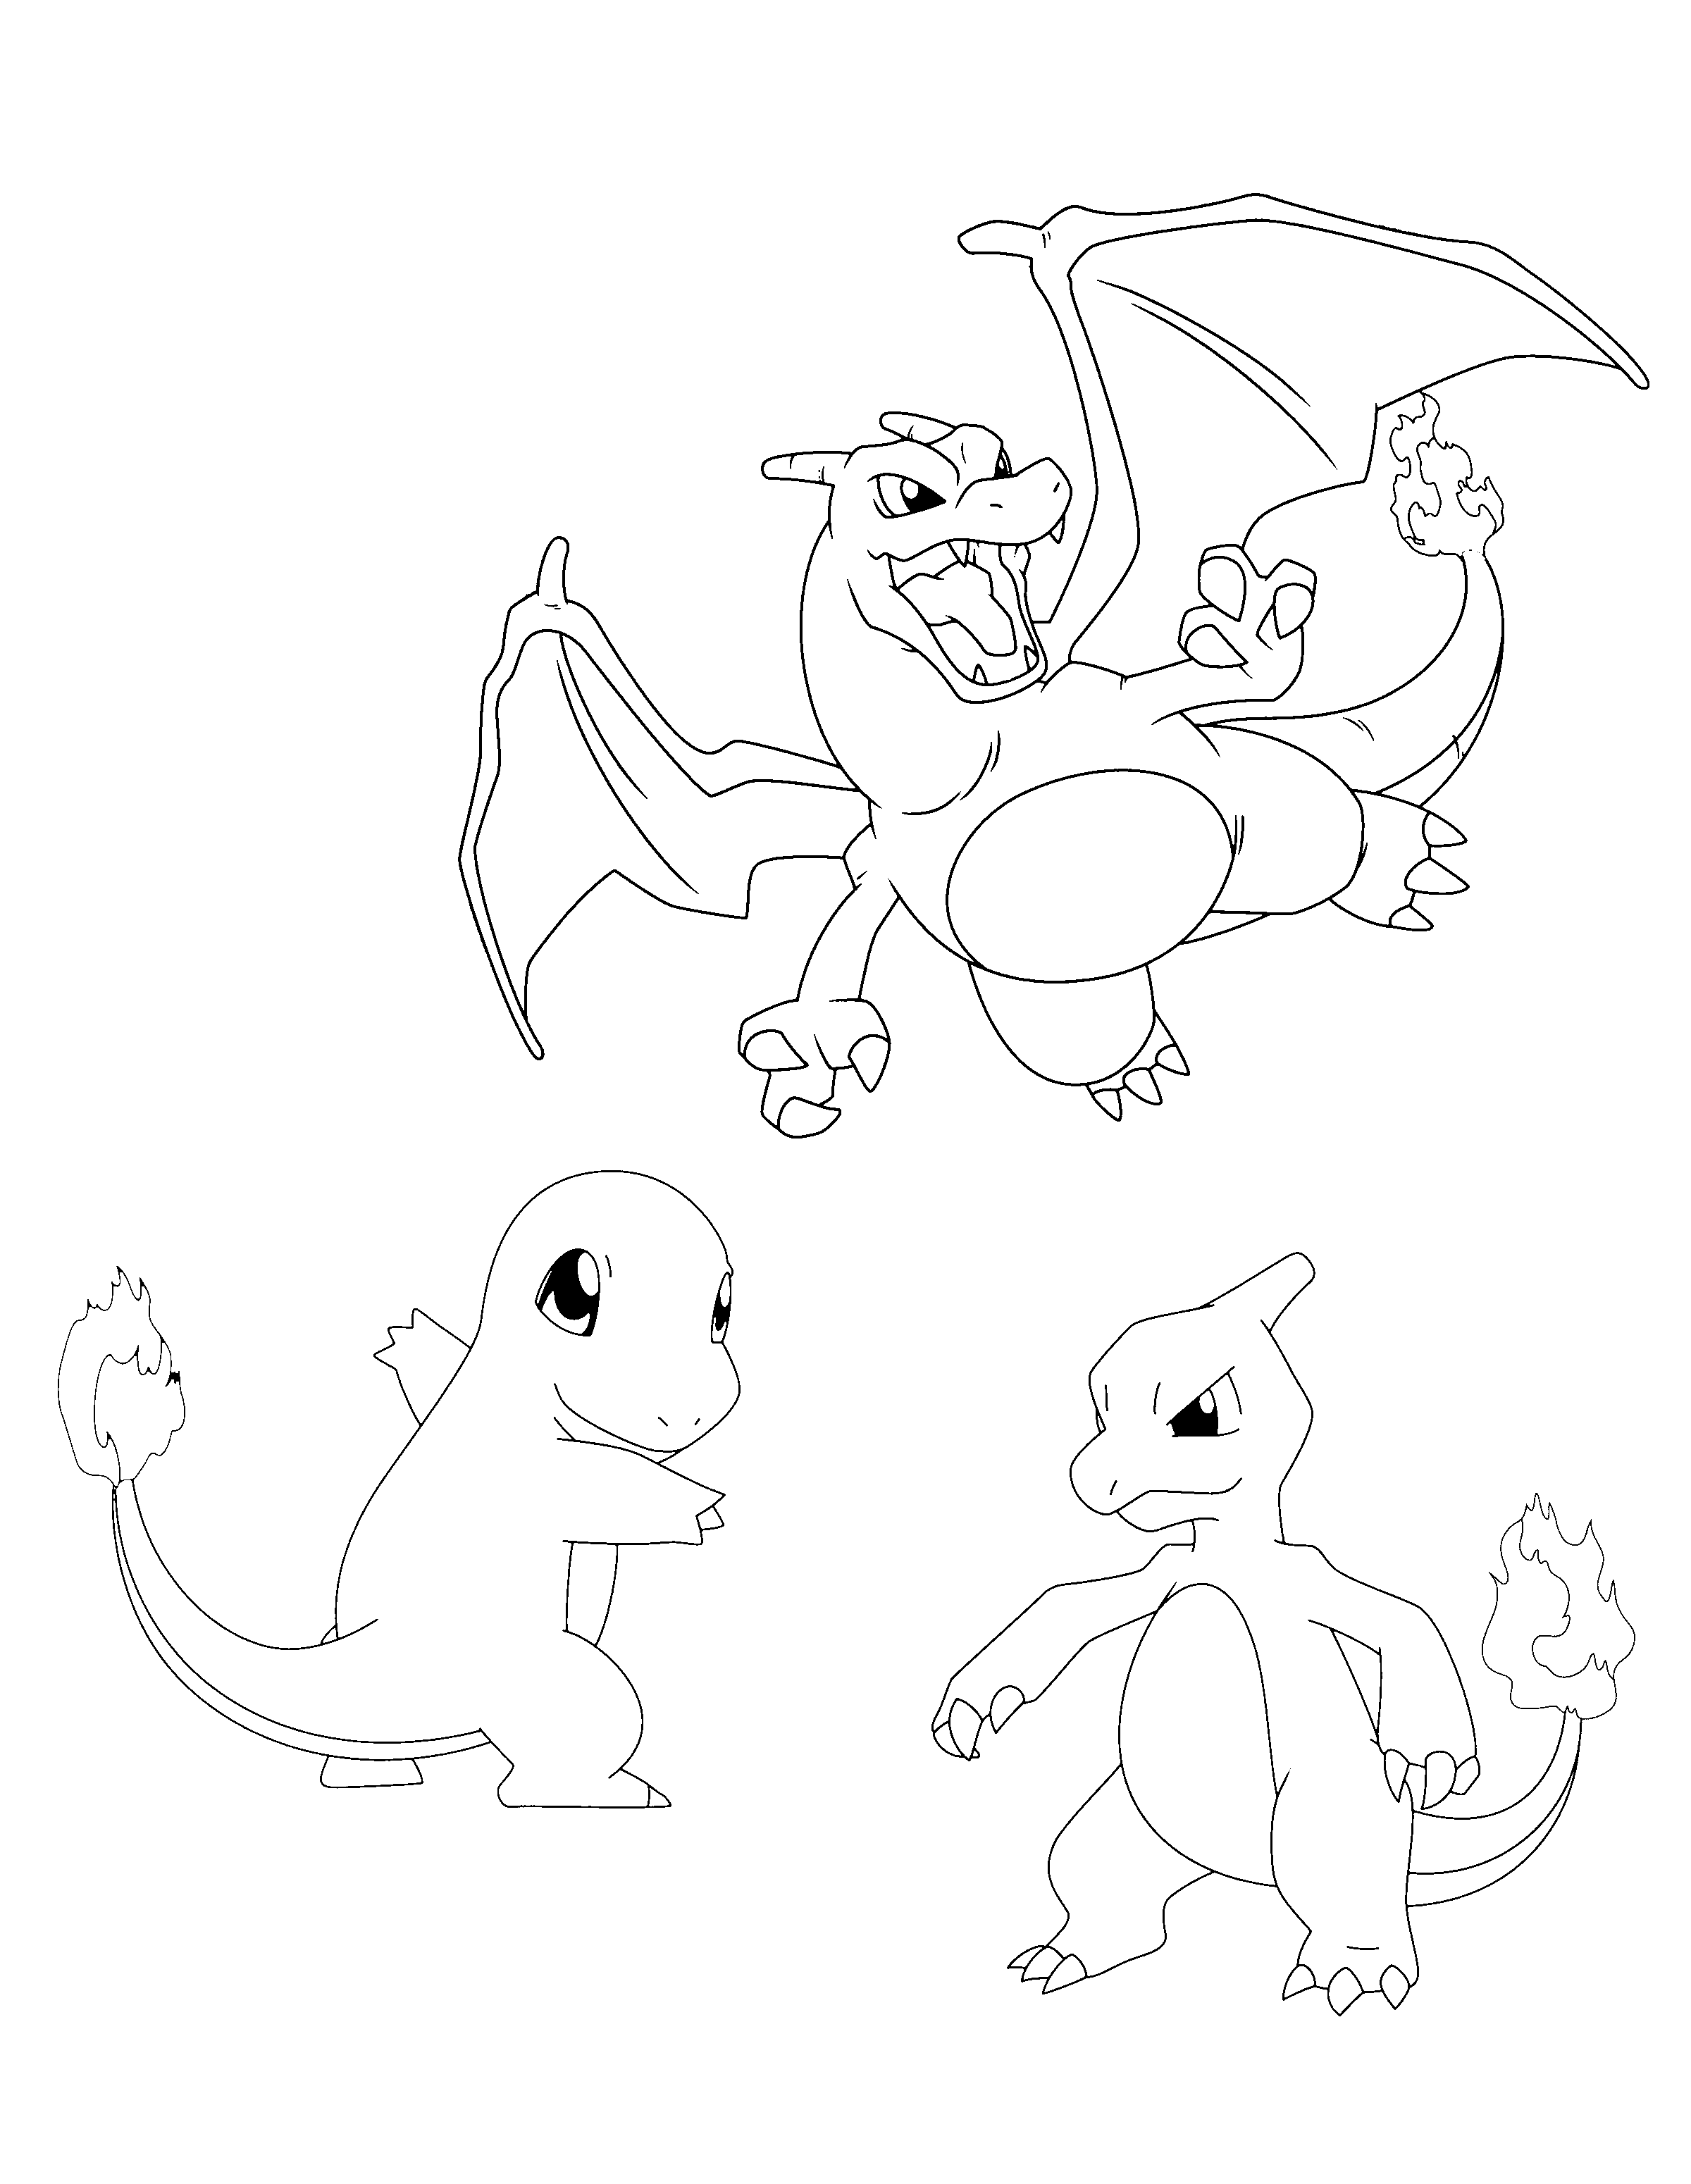 pokemon card coloring pages coloring page pokemon coloring pages 39 pokemon pages card coloring 